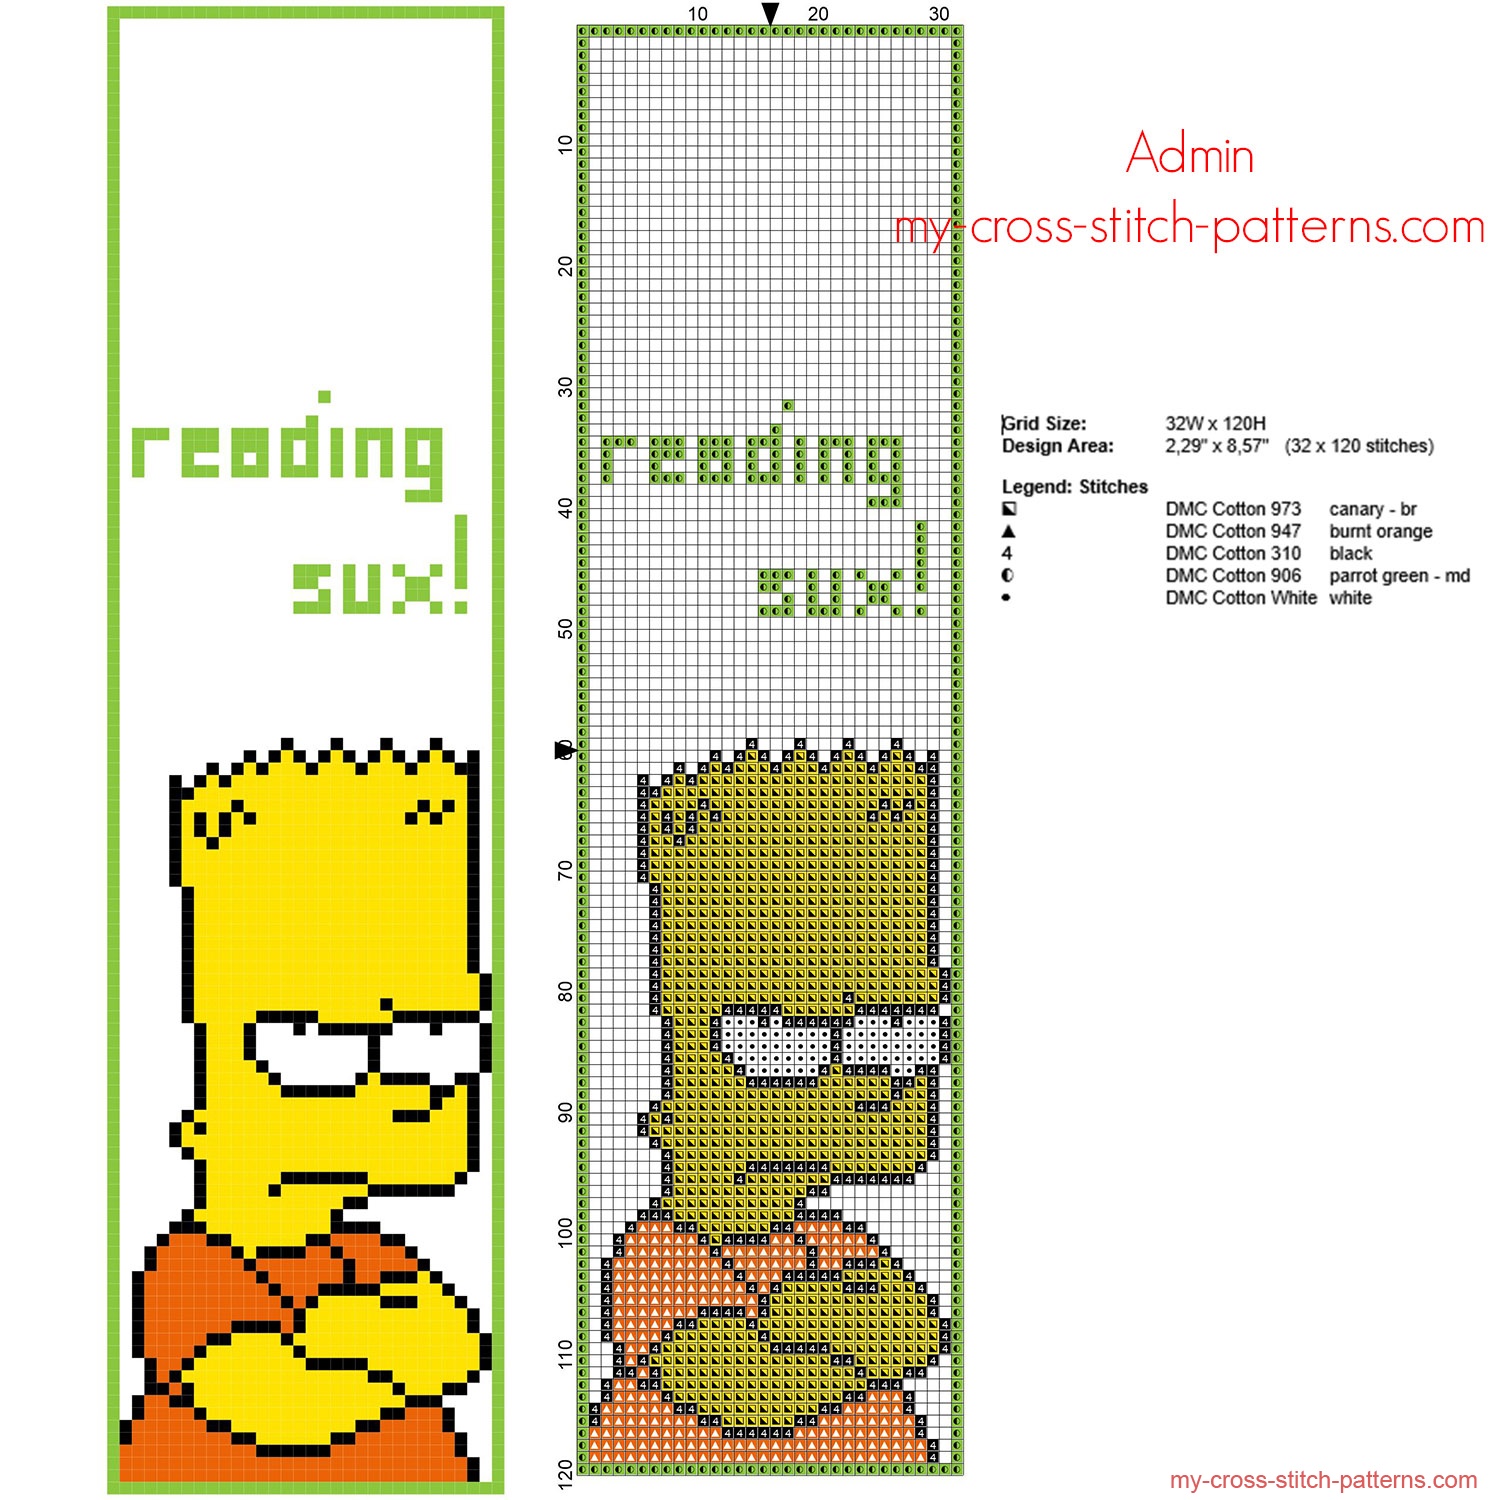 funny_cross_stitch_bookmark_with_bart_simpson_free_download_size_32_x_120_stitches